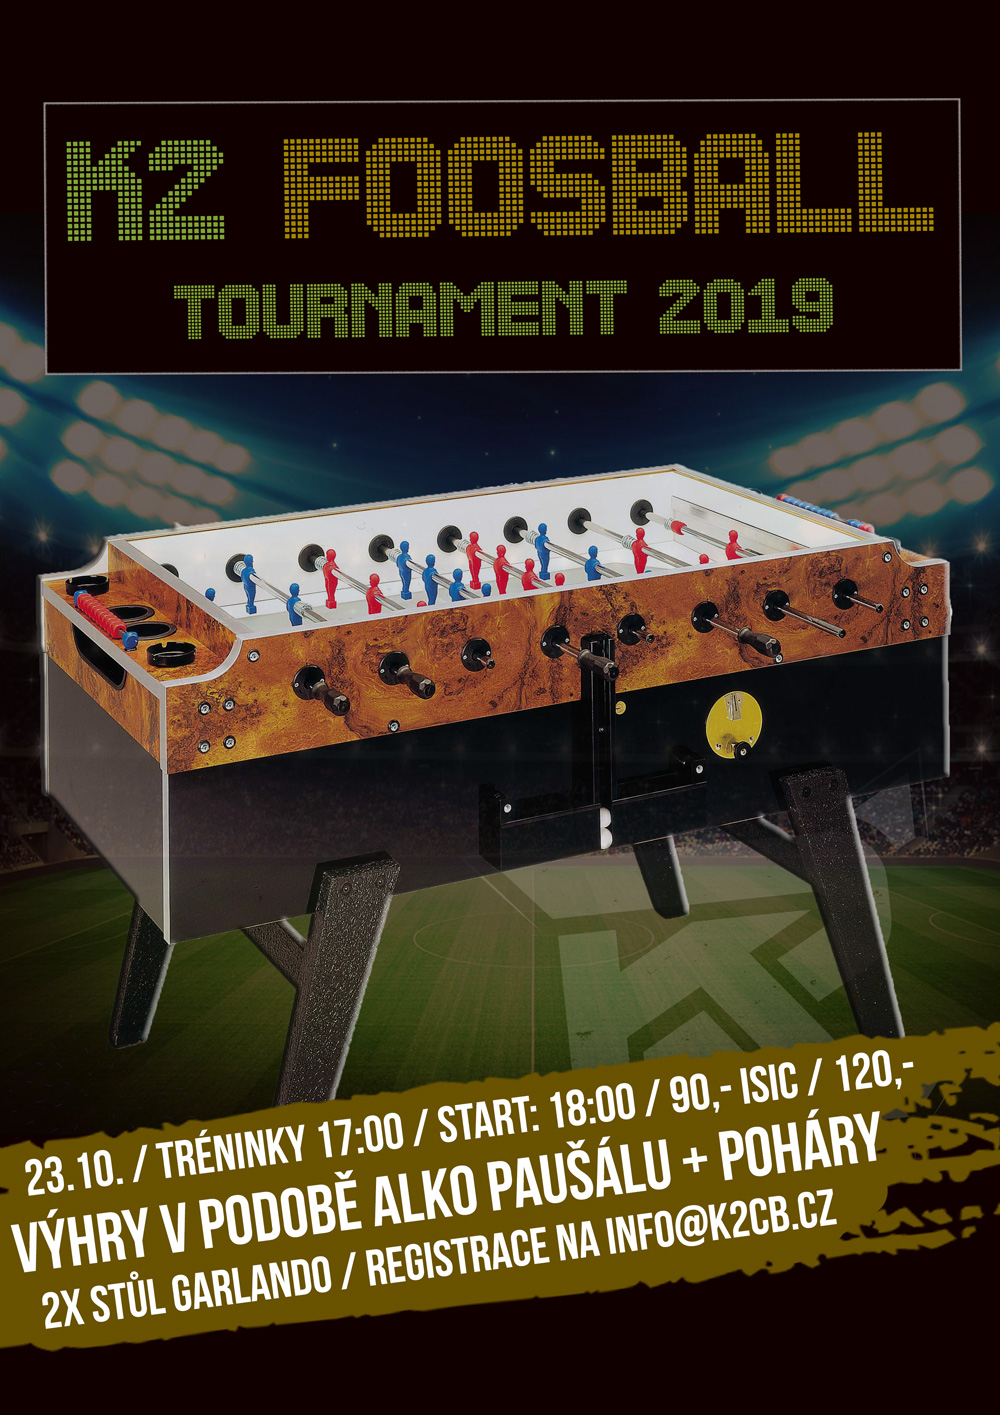 K2 Foosball championship + afterparty